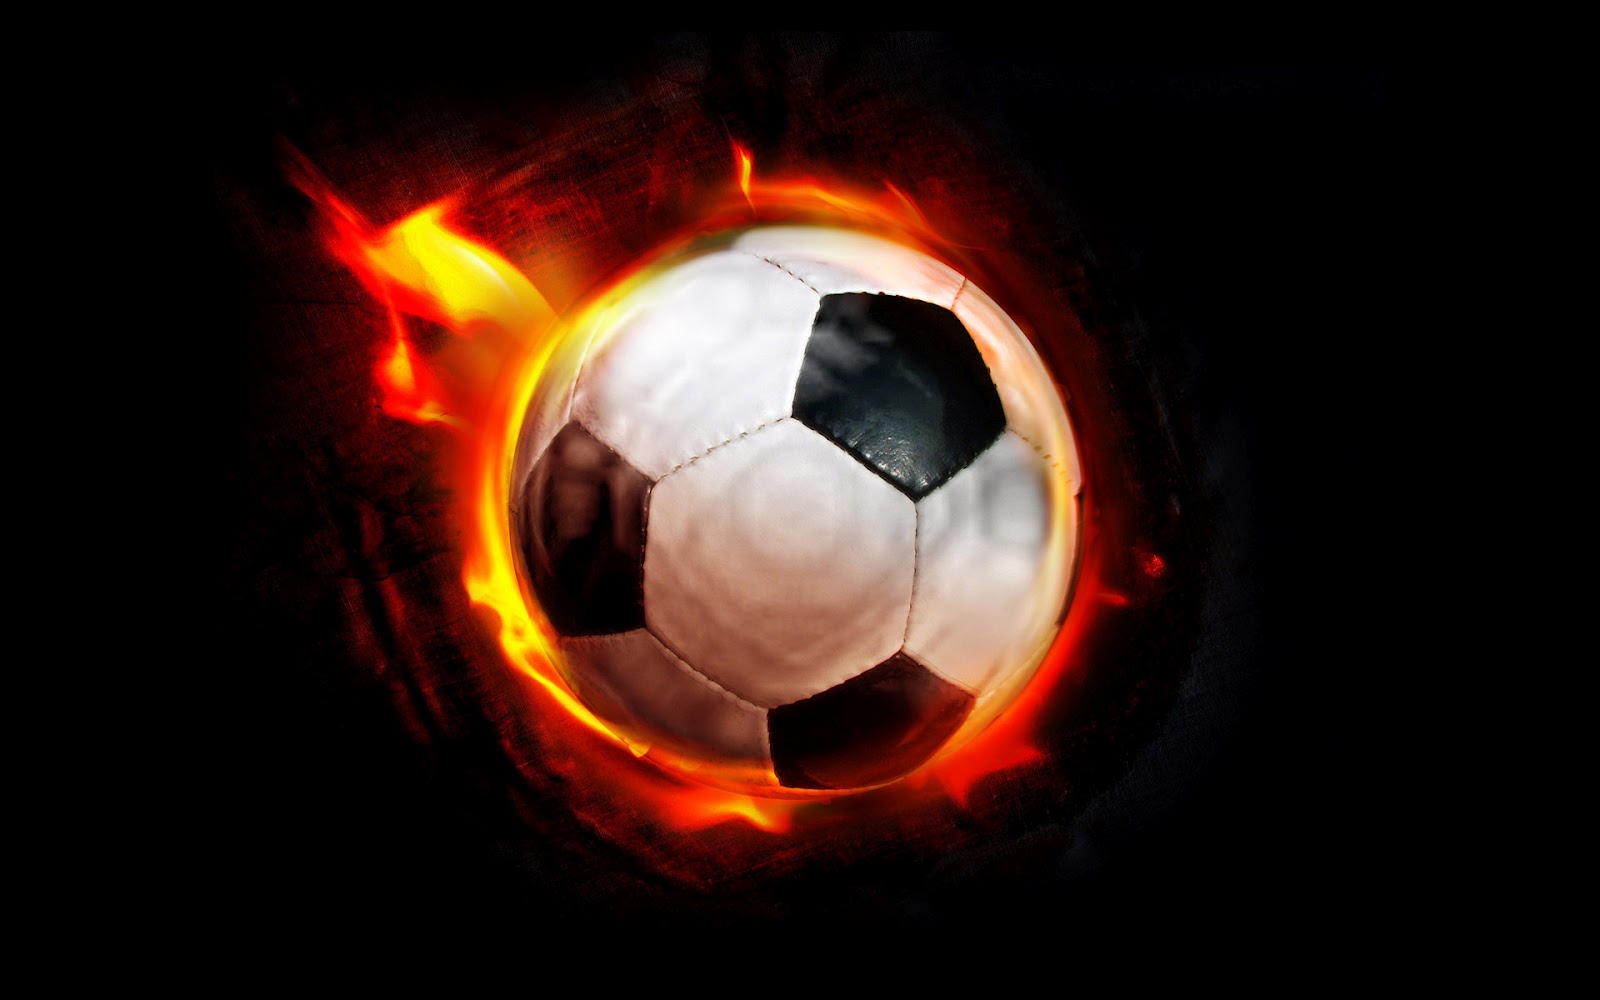 life with the soccer fire wallpaper Light up your desktop background